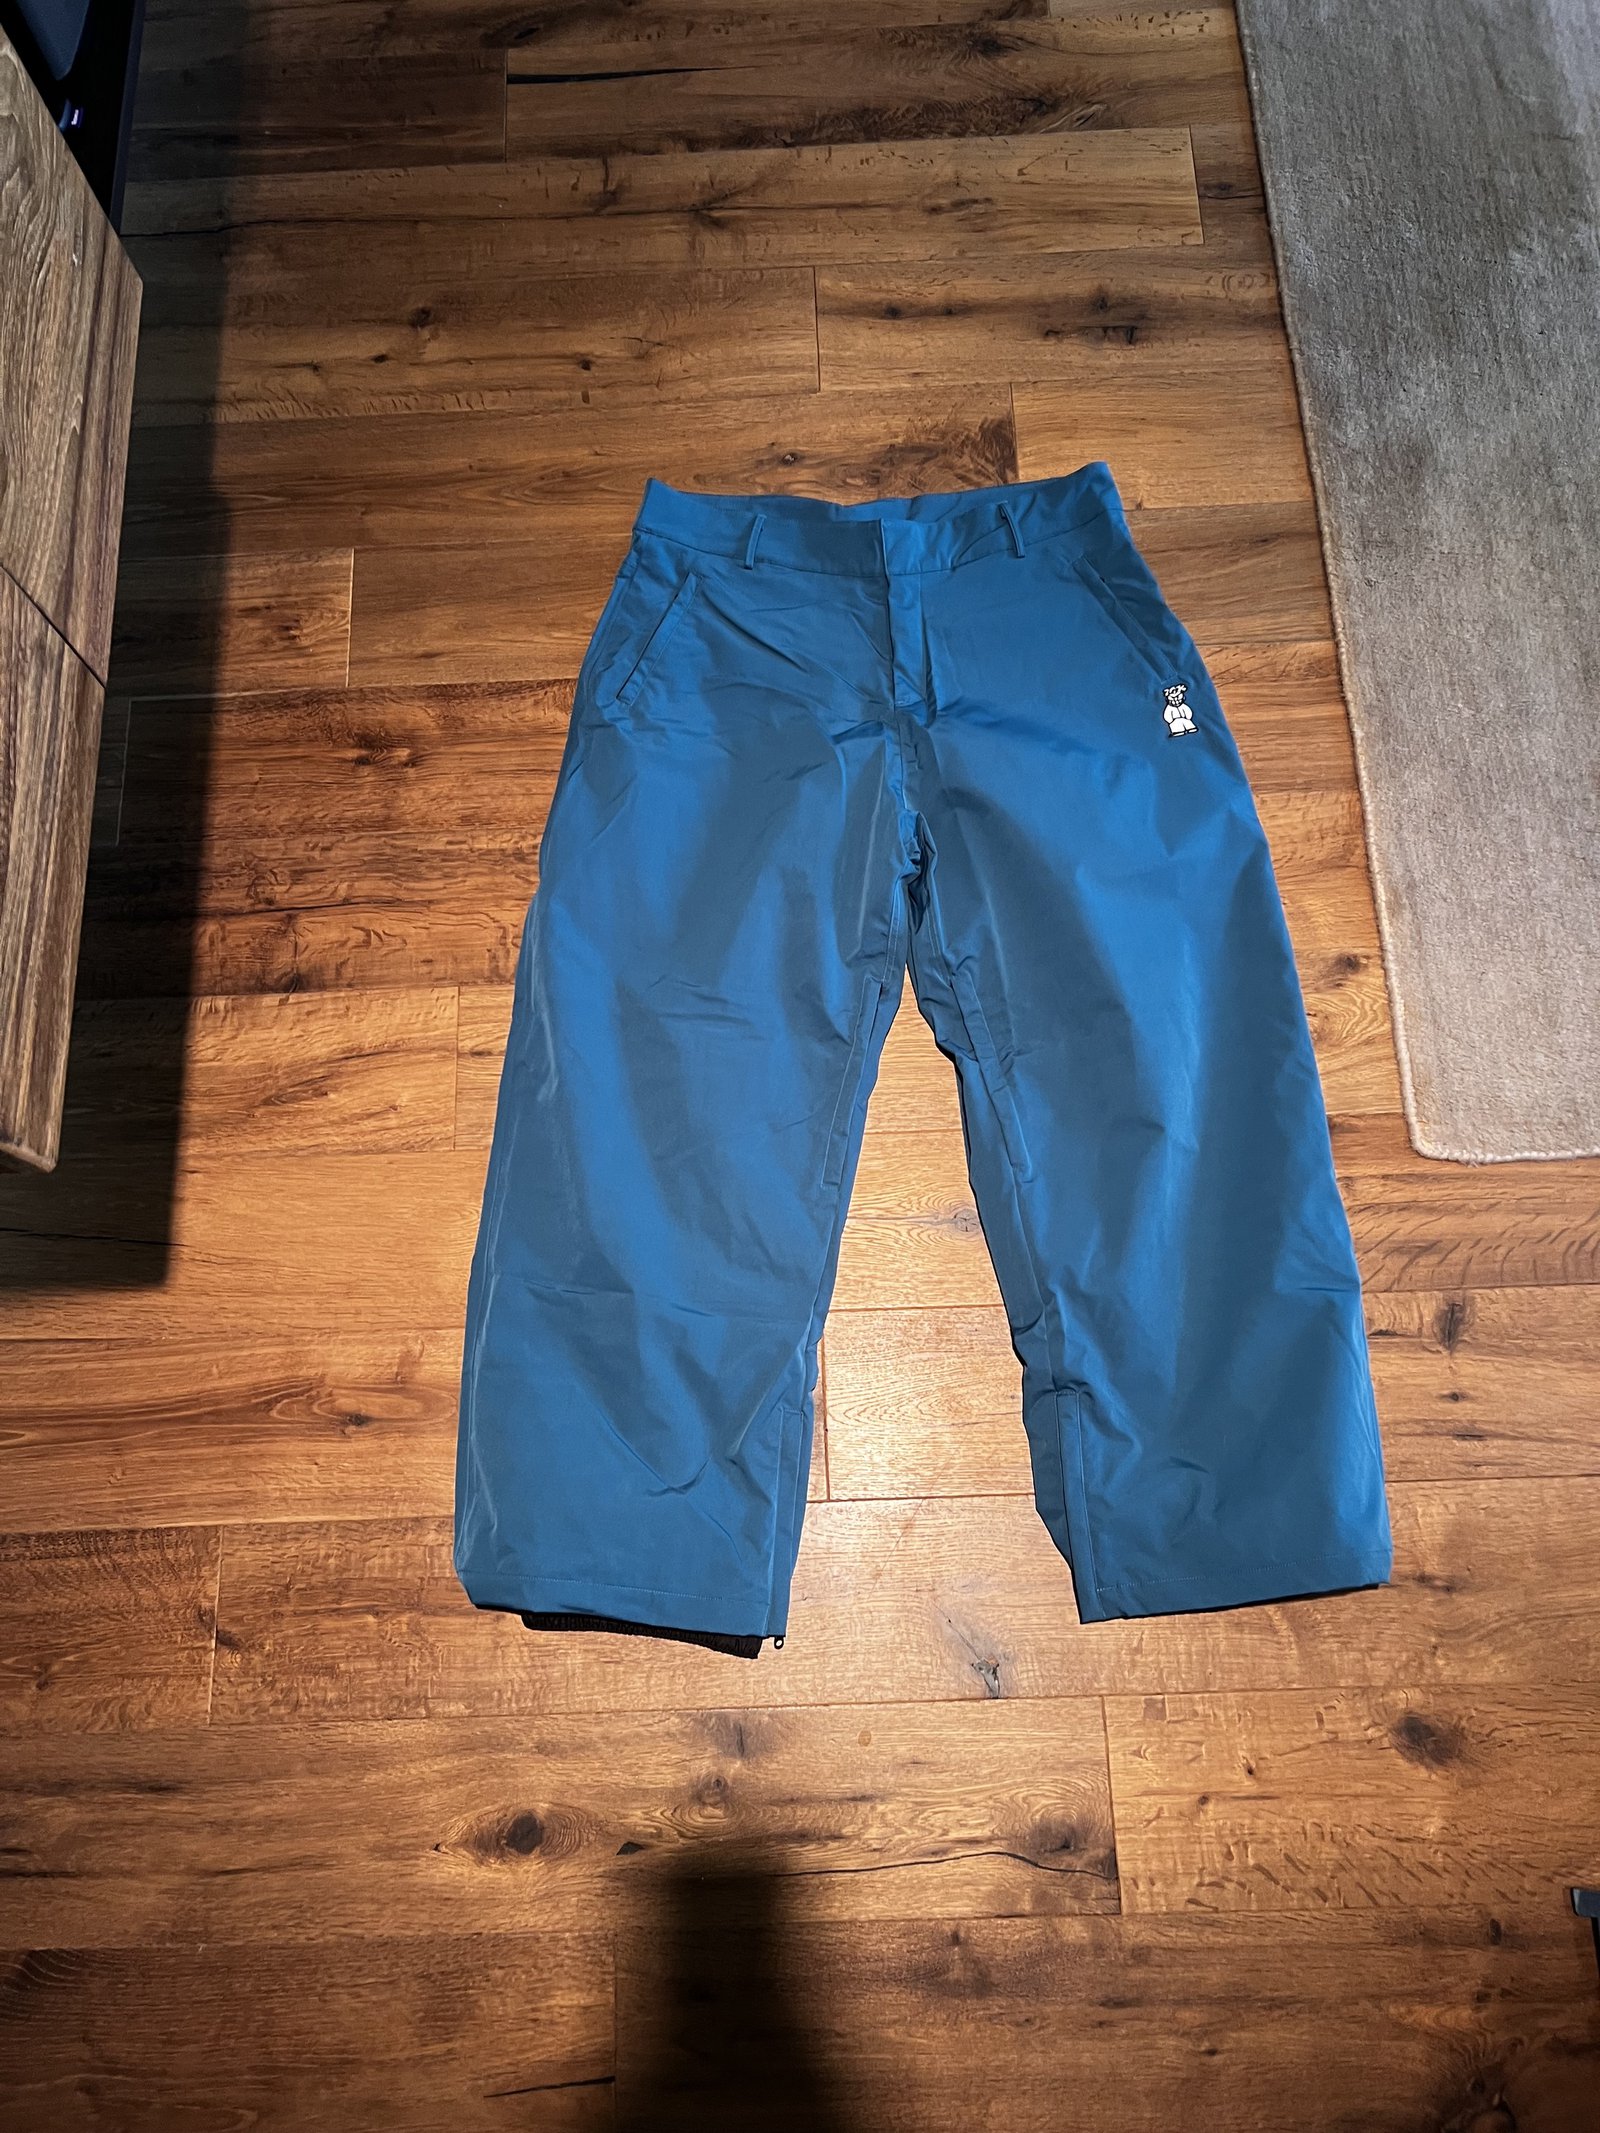 2022 Harlaut Shitkid Pants Size L (Teal) $200